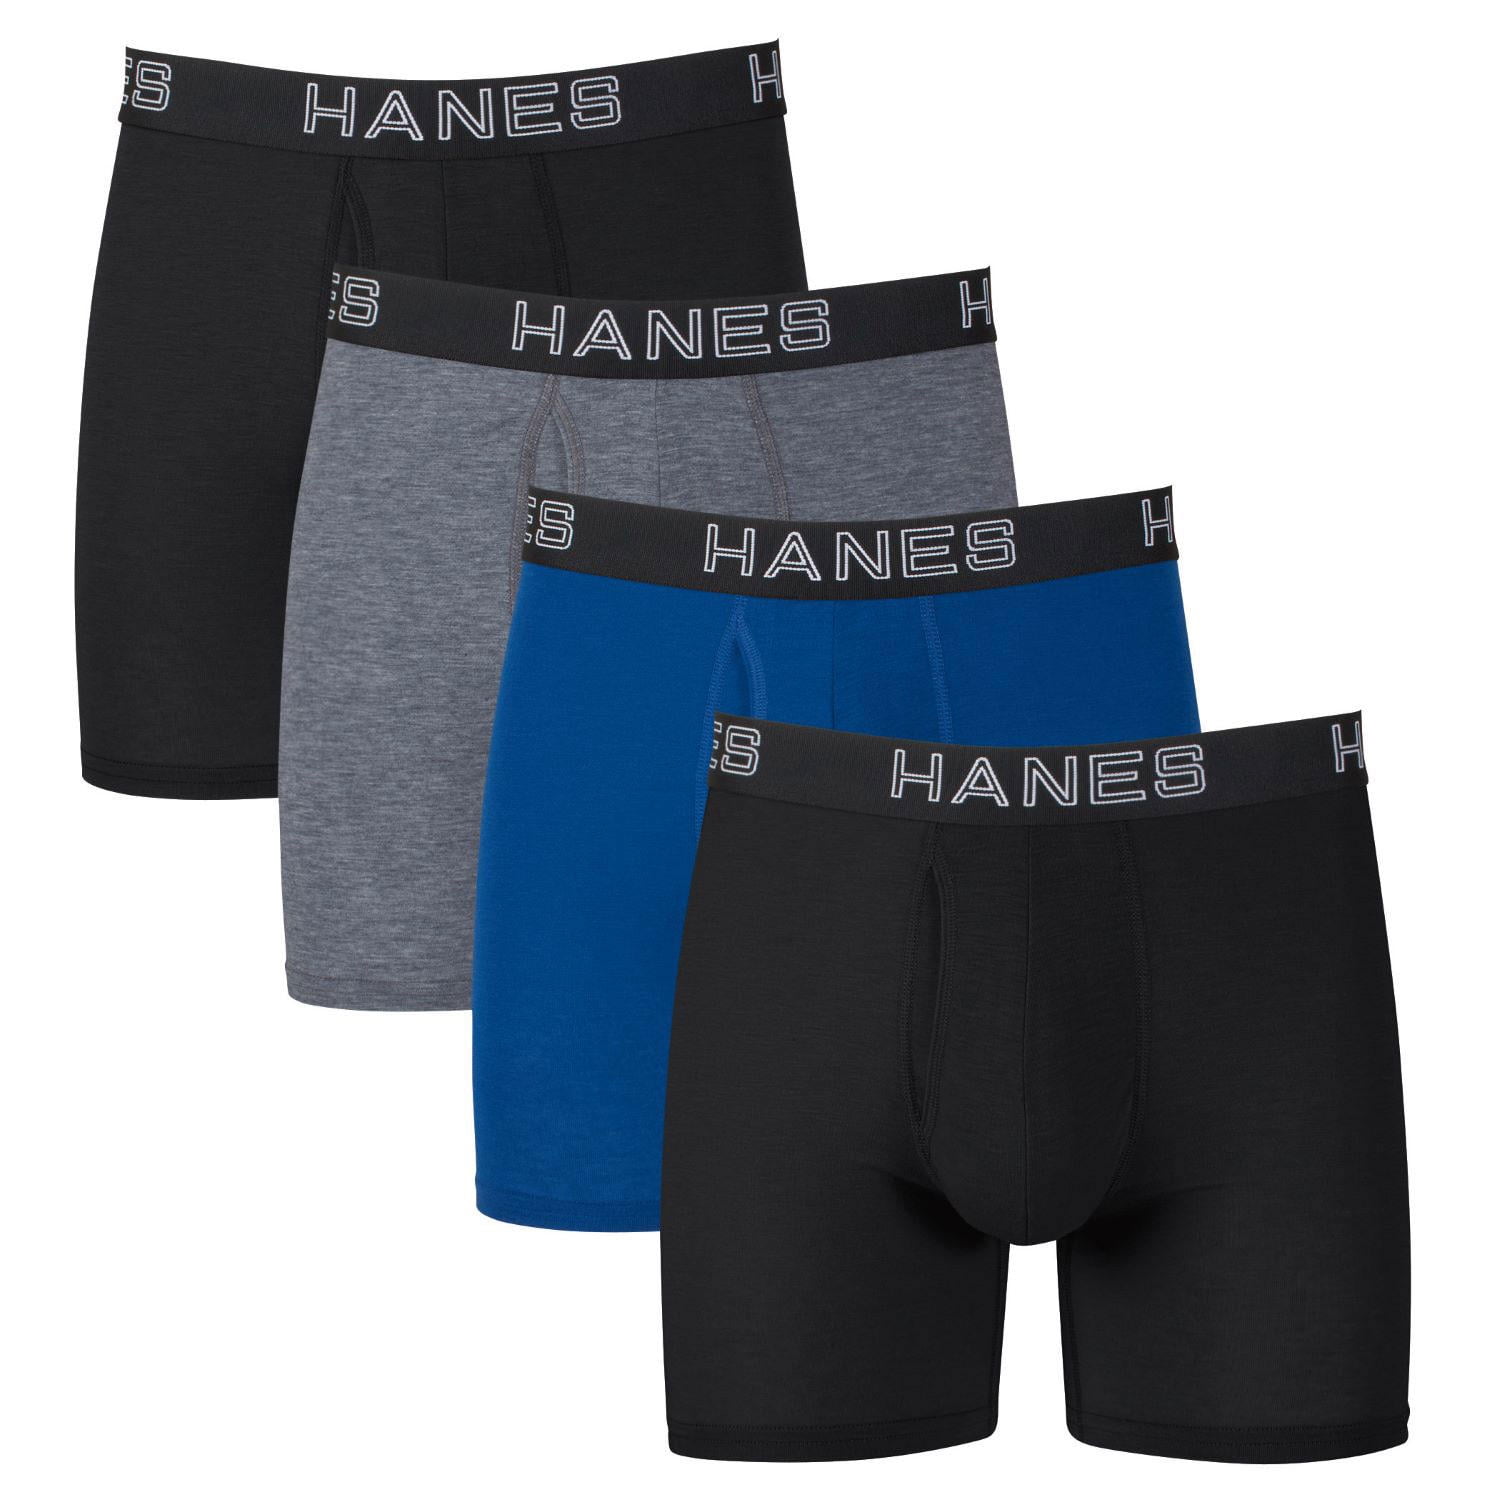 Hanes Best Black/Blue/Grey Total Support Pouch Boxer Brief, 4 Pack ...